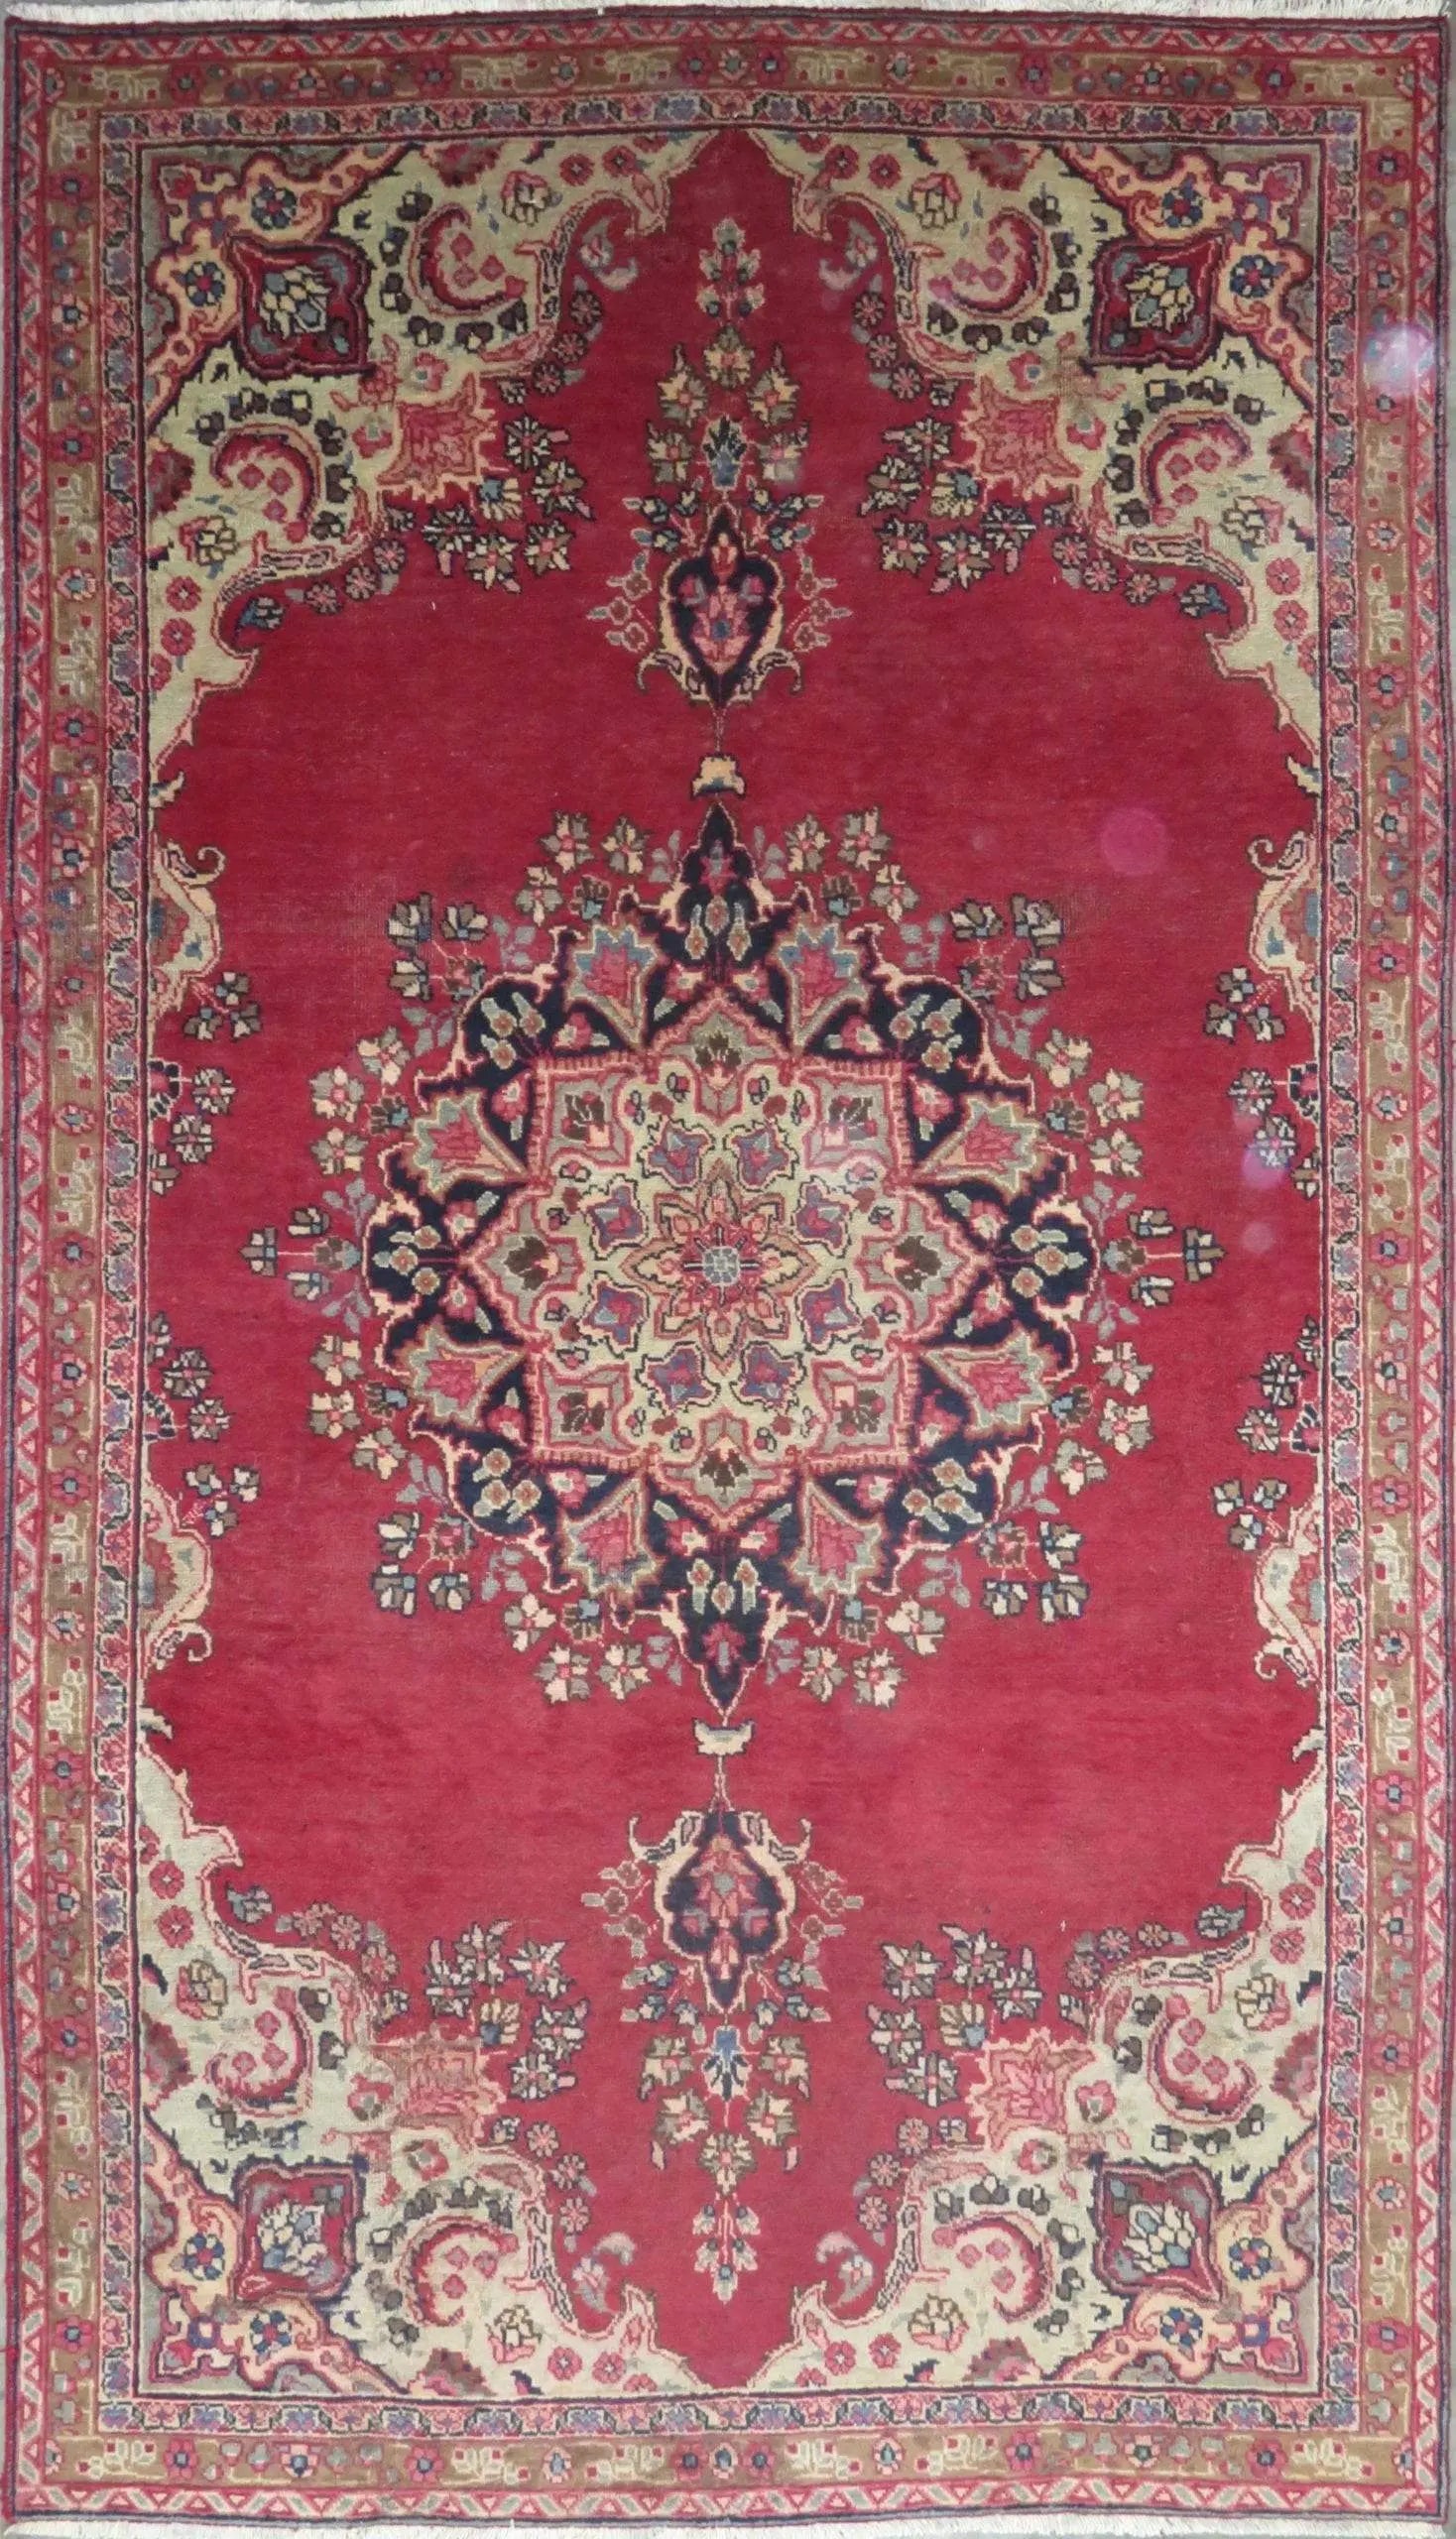 Hand-Knotted Persian Wool Rug _ Luxurious Vintage Design, 7'9" x 4'5", Artisan Crafted